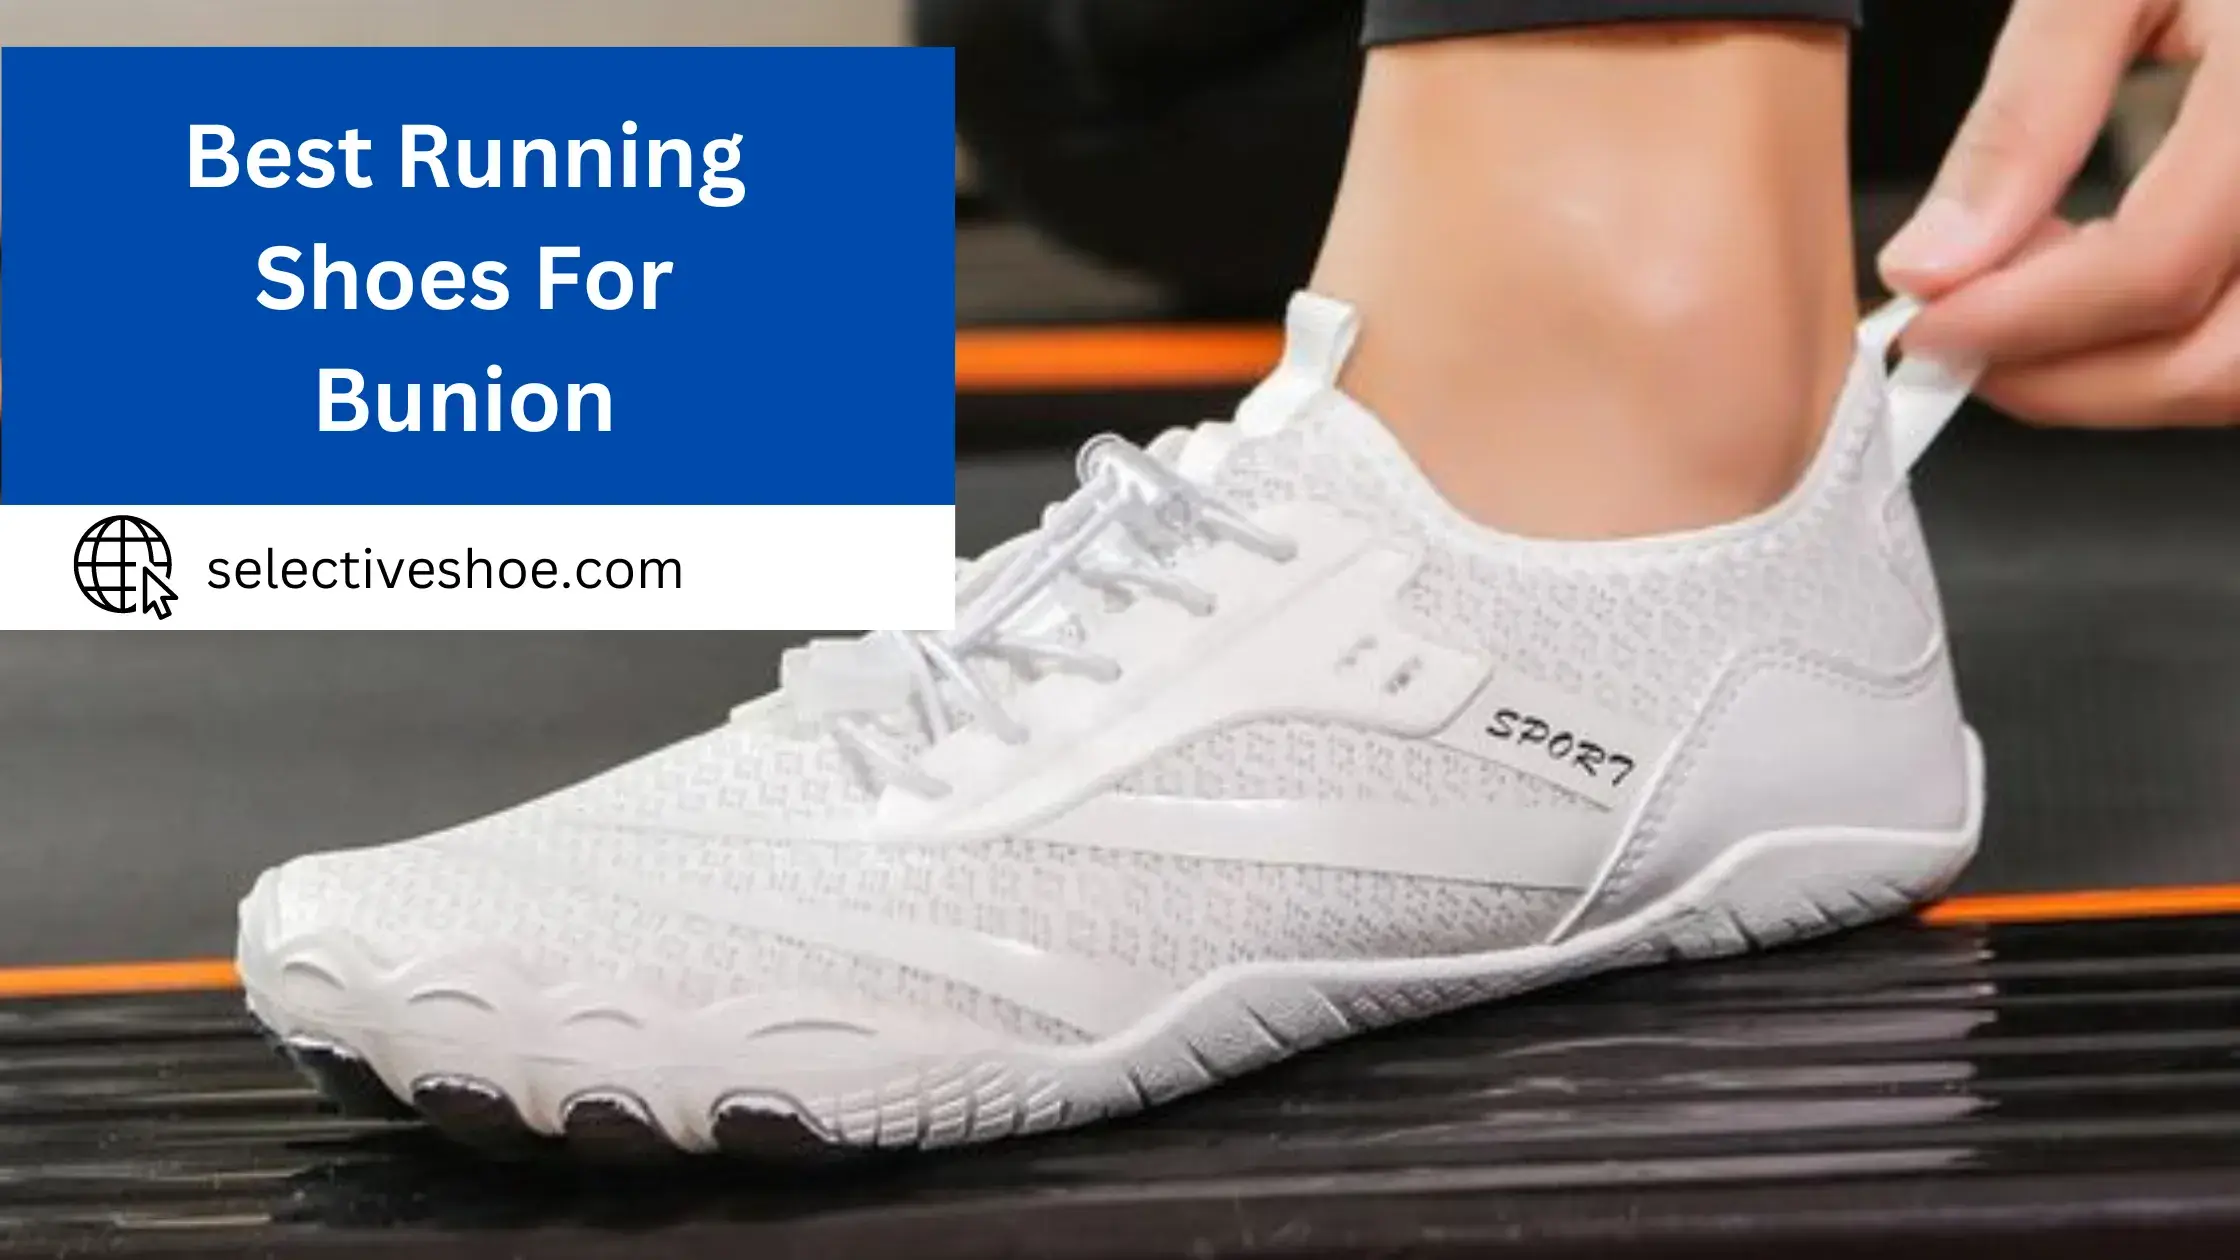 Best Running Shoes For Bunion - A Comprehensive Guide